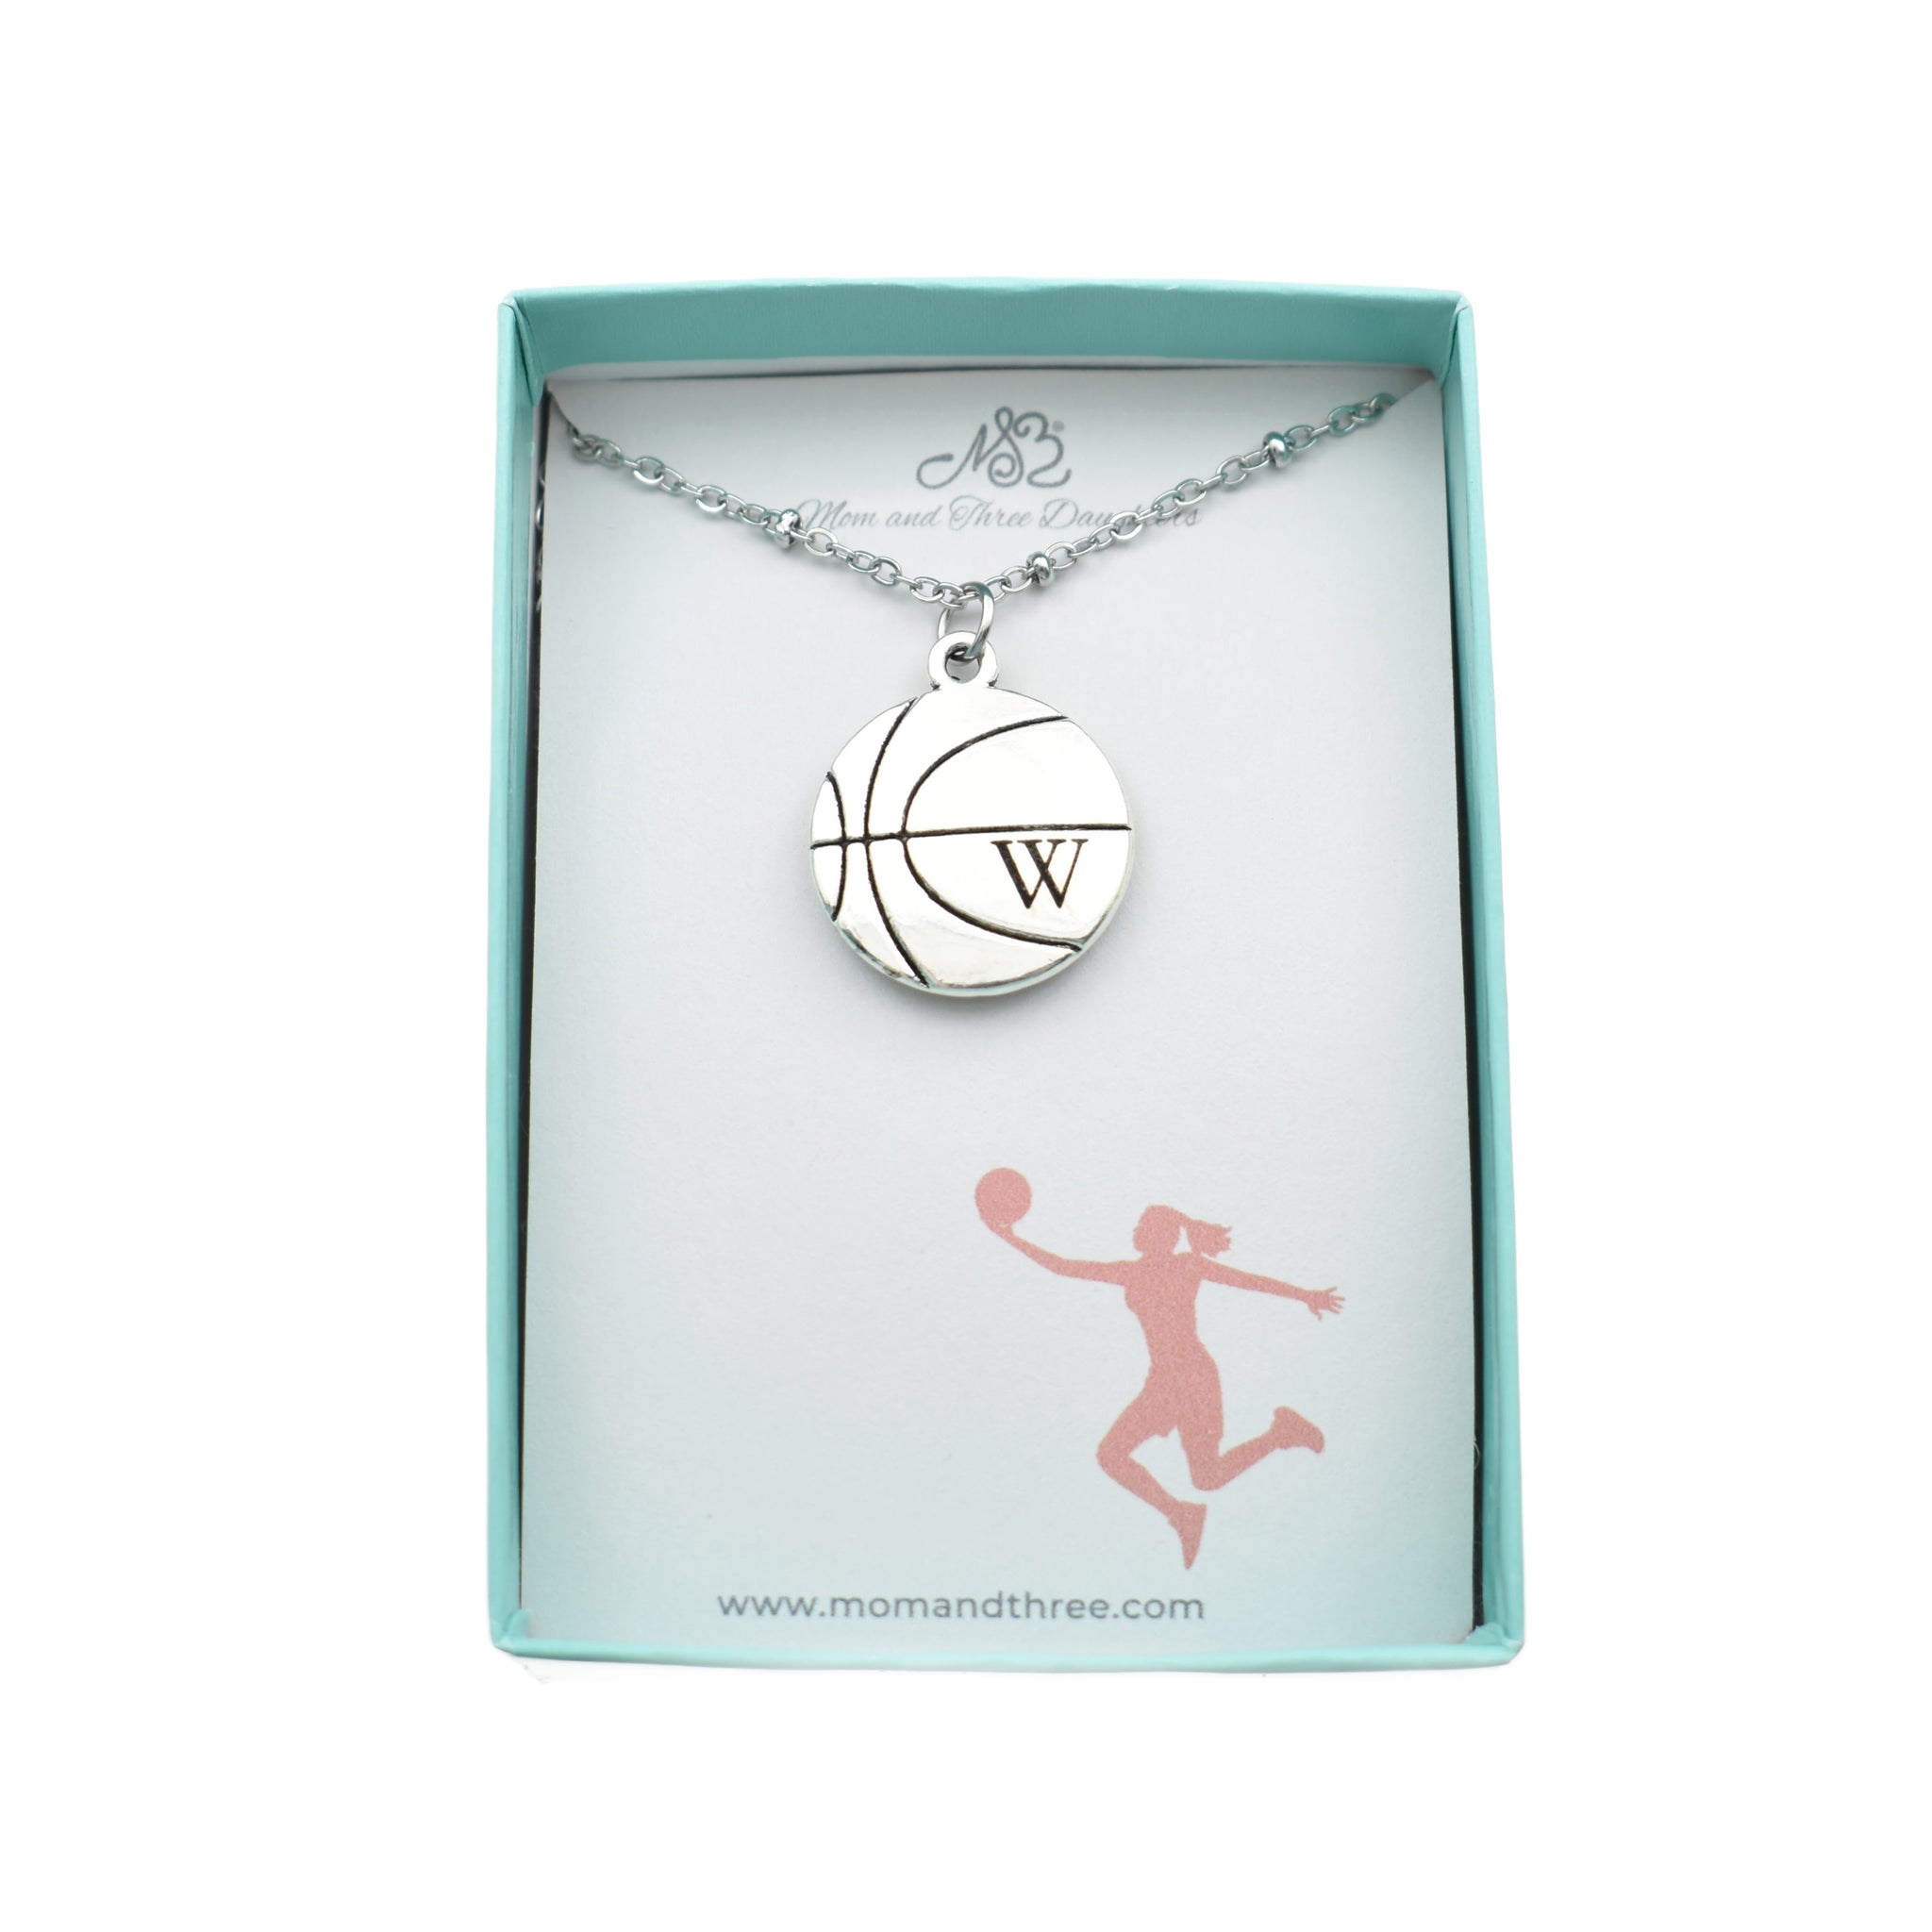 Laser Engraved Basketball charm pendant in silver tone metal on a stainless steel satellite chain. Girl's necklace. Basketball player gift.